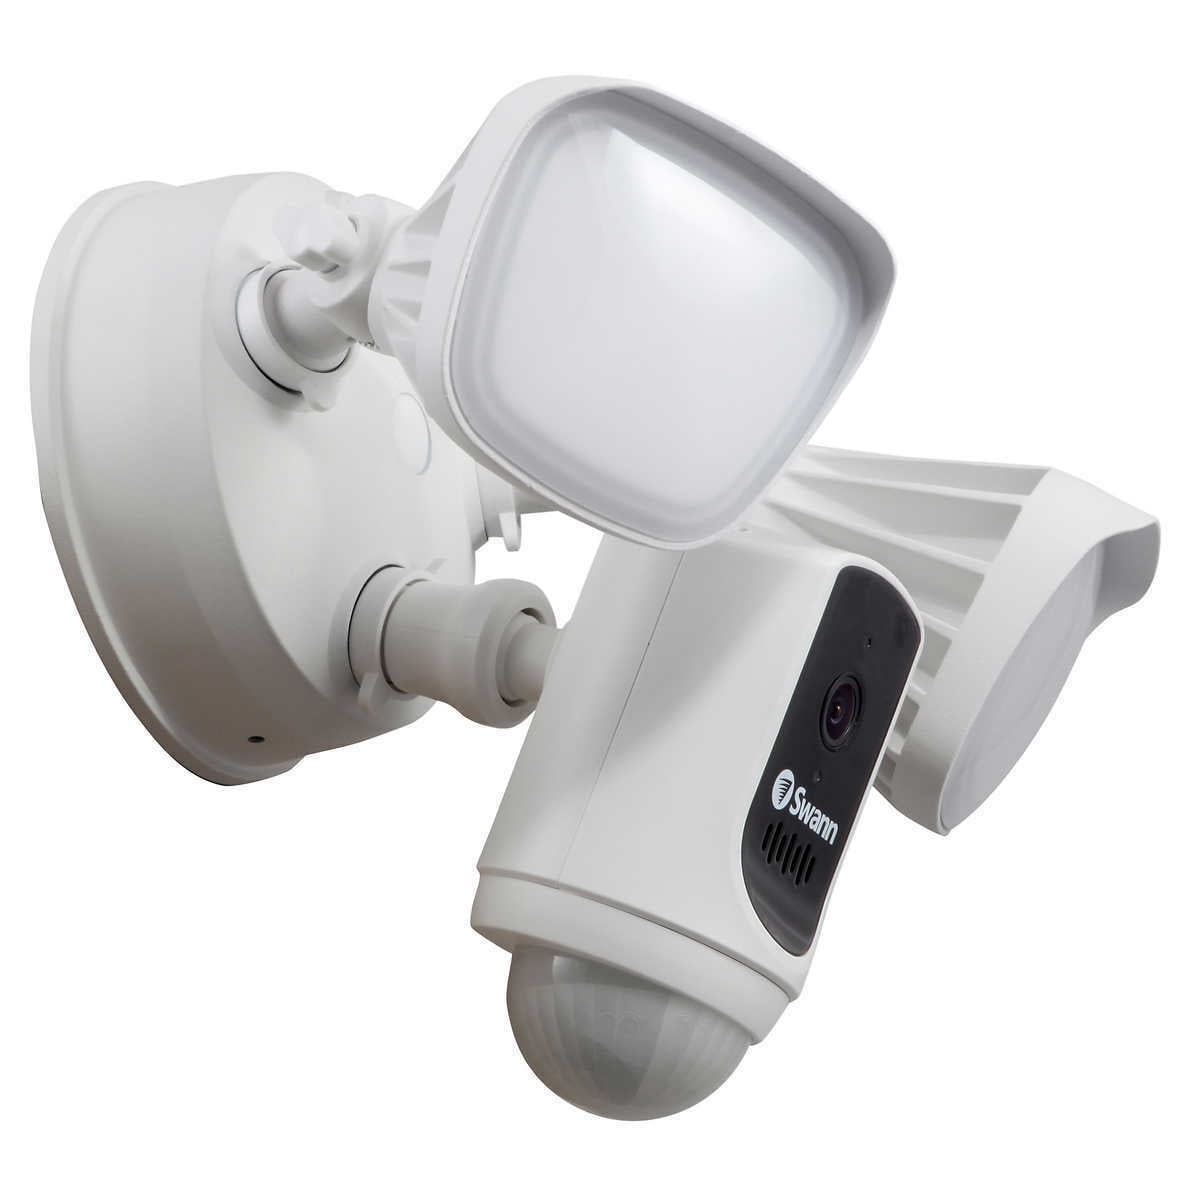 Swann LED Smart Floodlight with Security Camera WHITE FREE SHIPPING